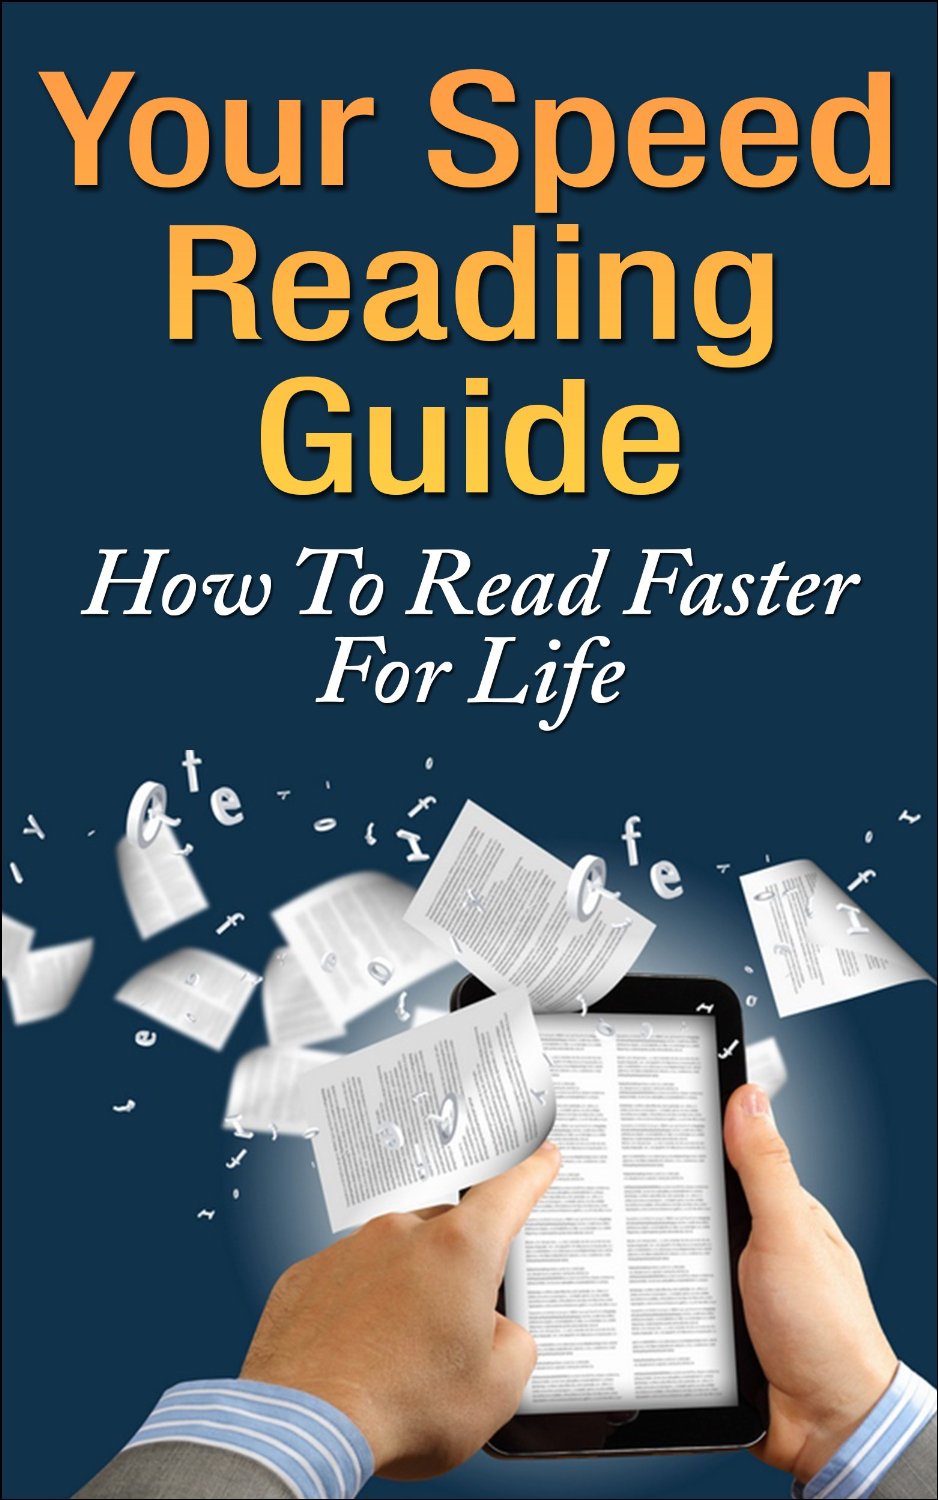 Your Speed Reading Guide How To Read Faster For Life by Allan Green